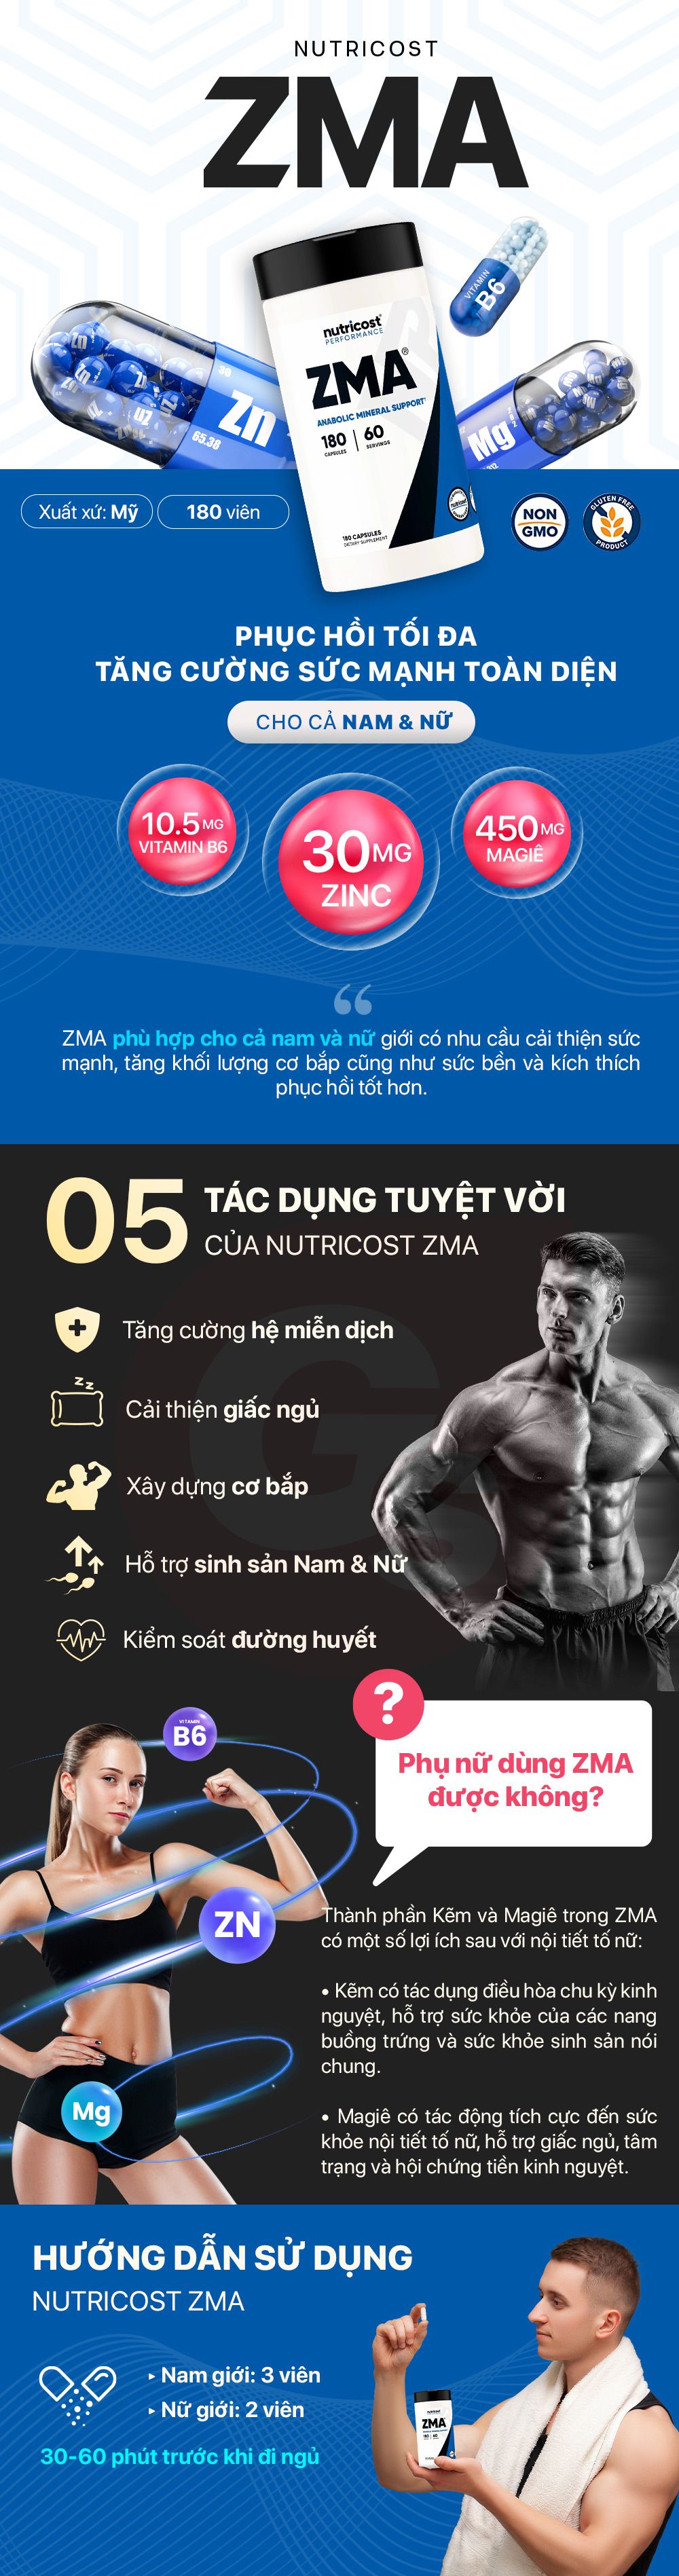 nutricost-zma-anabolic-mineral-support-tang-cuong-suc-manh-phuc-hoi-gymstore